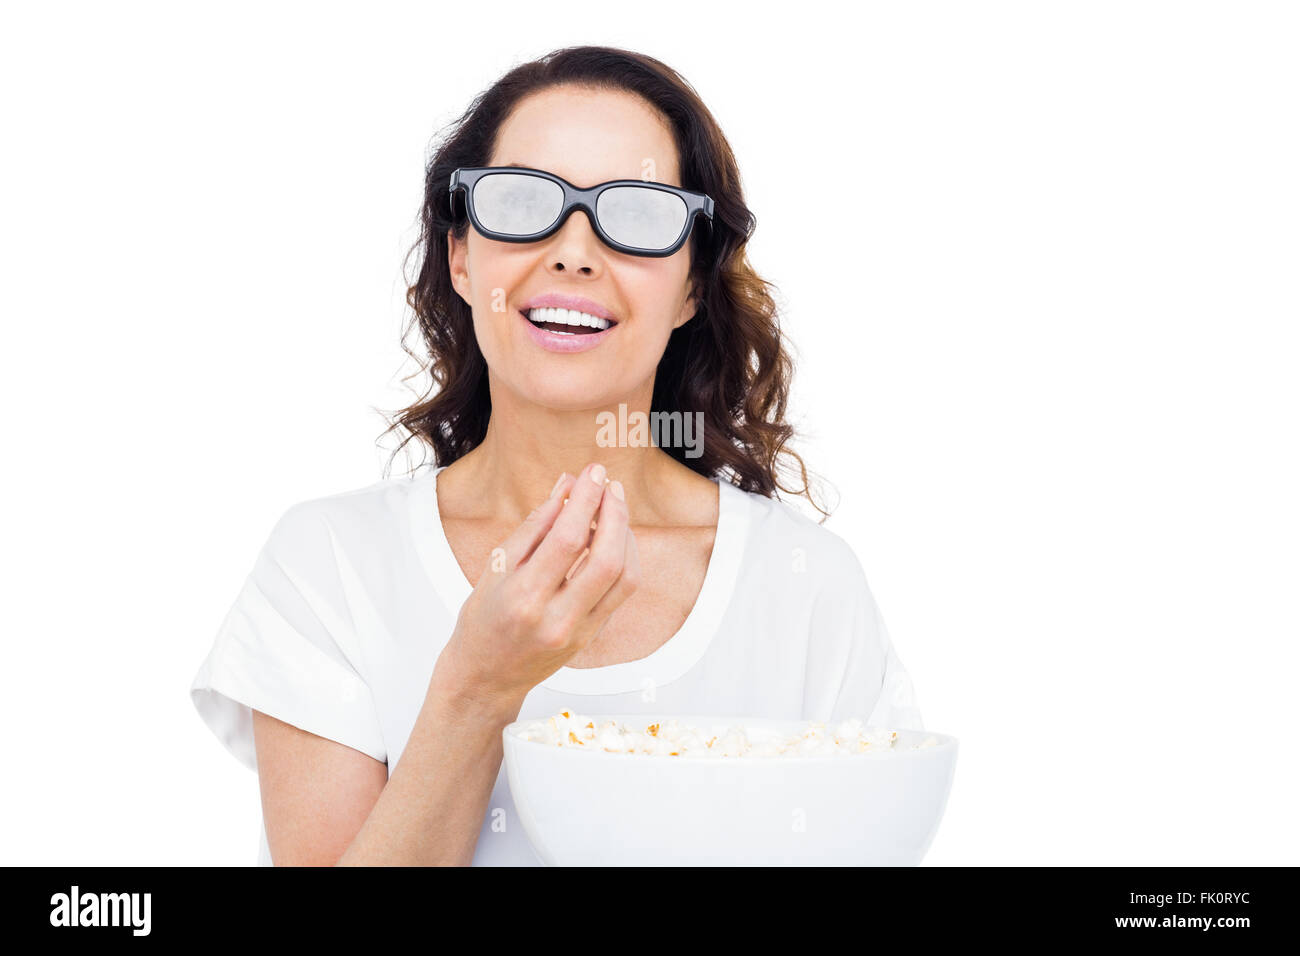 Pretty woman with 3D glasses eating popcorn Stock Photo